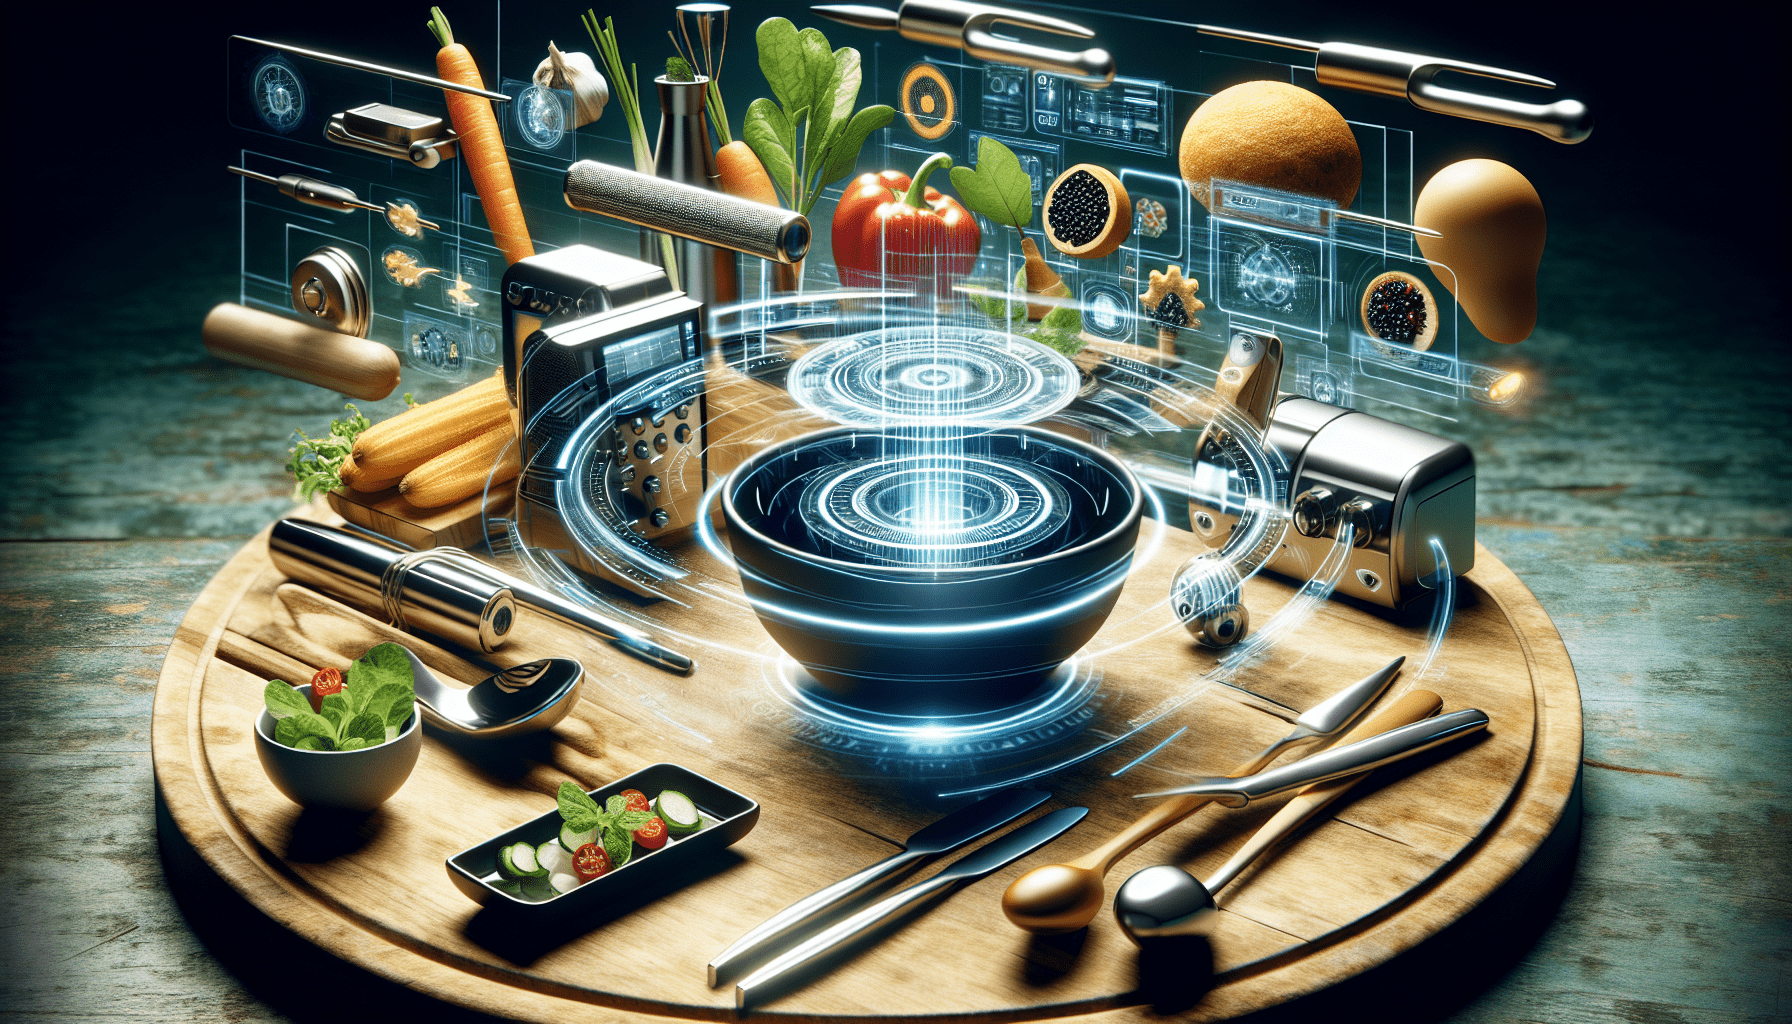 How Has Technology Impacted Cooking?